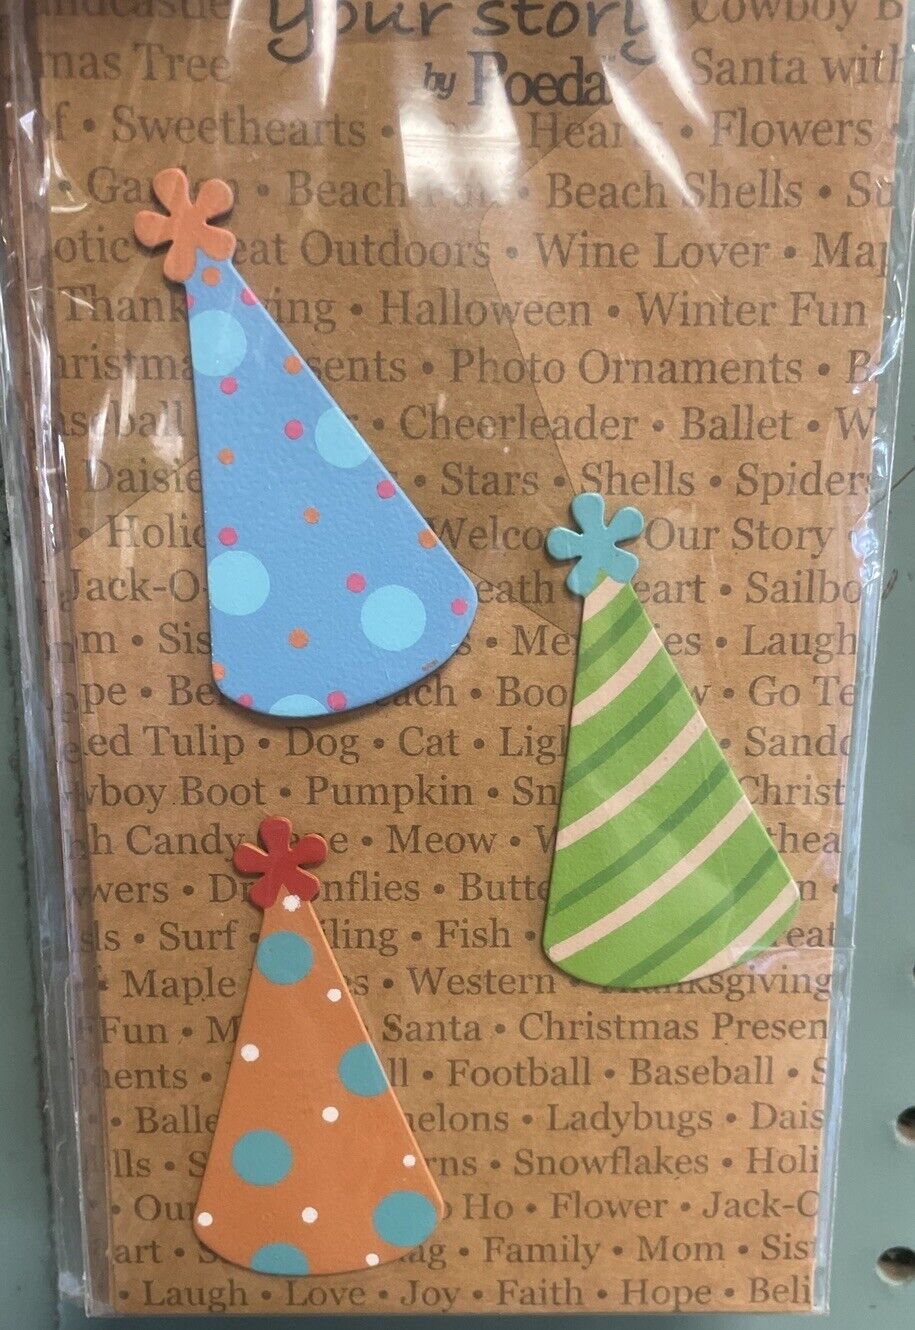 Embellish Your Story By Roeda Party Hat Magnets (set of 3)